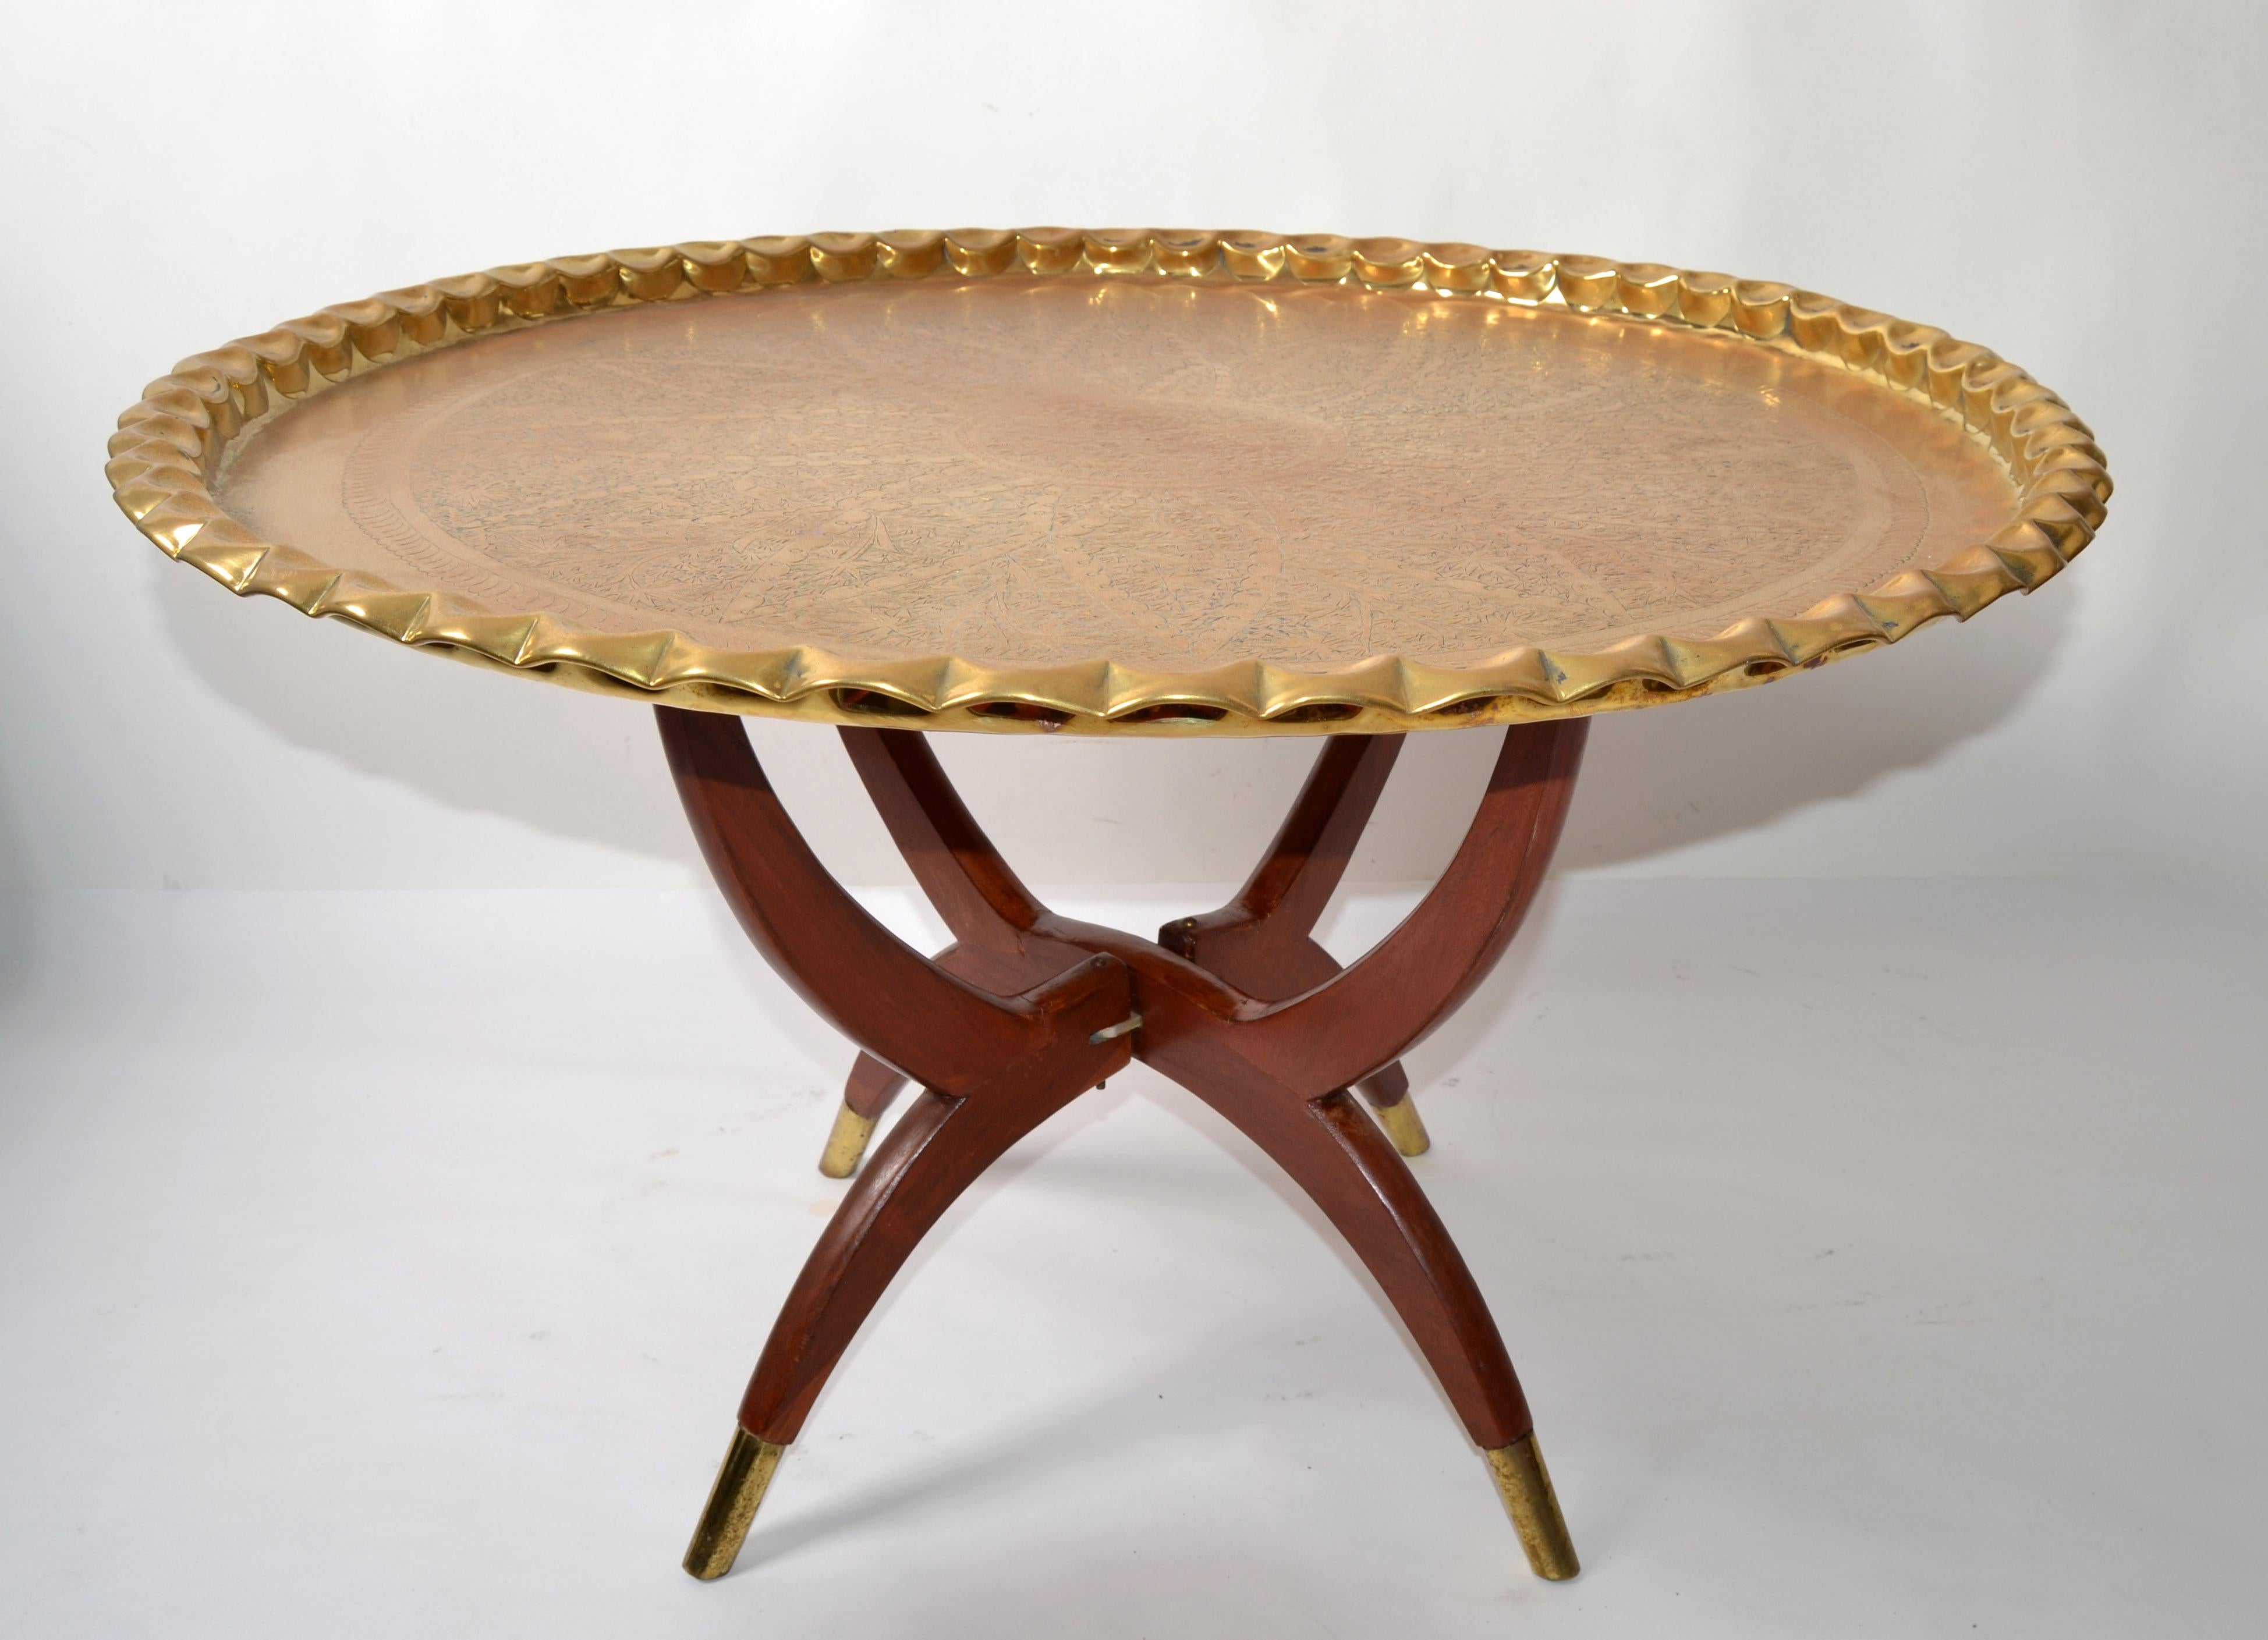 Oriental Vintage Mid-Century Modern walnut spider leg round coffee table with a Moroccan bronze scalloped design tray.
The base folds up for easy storage and the feet tips will be accented in brass.
No markings.
Base measures: 20 x 20 x 18 inches